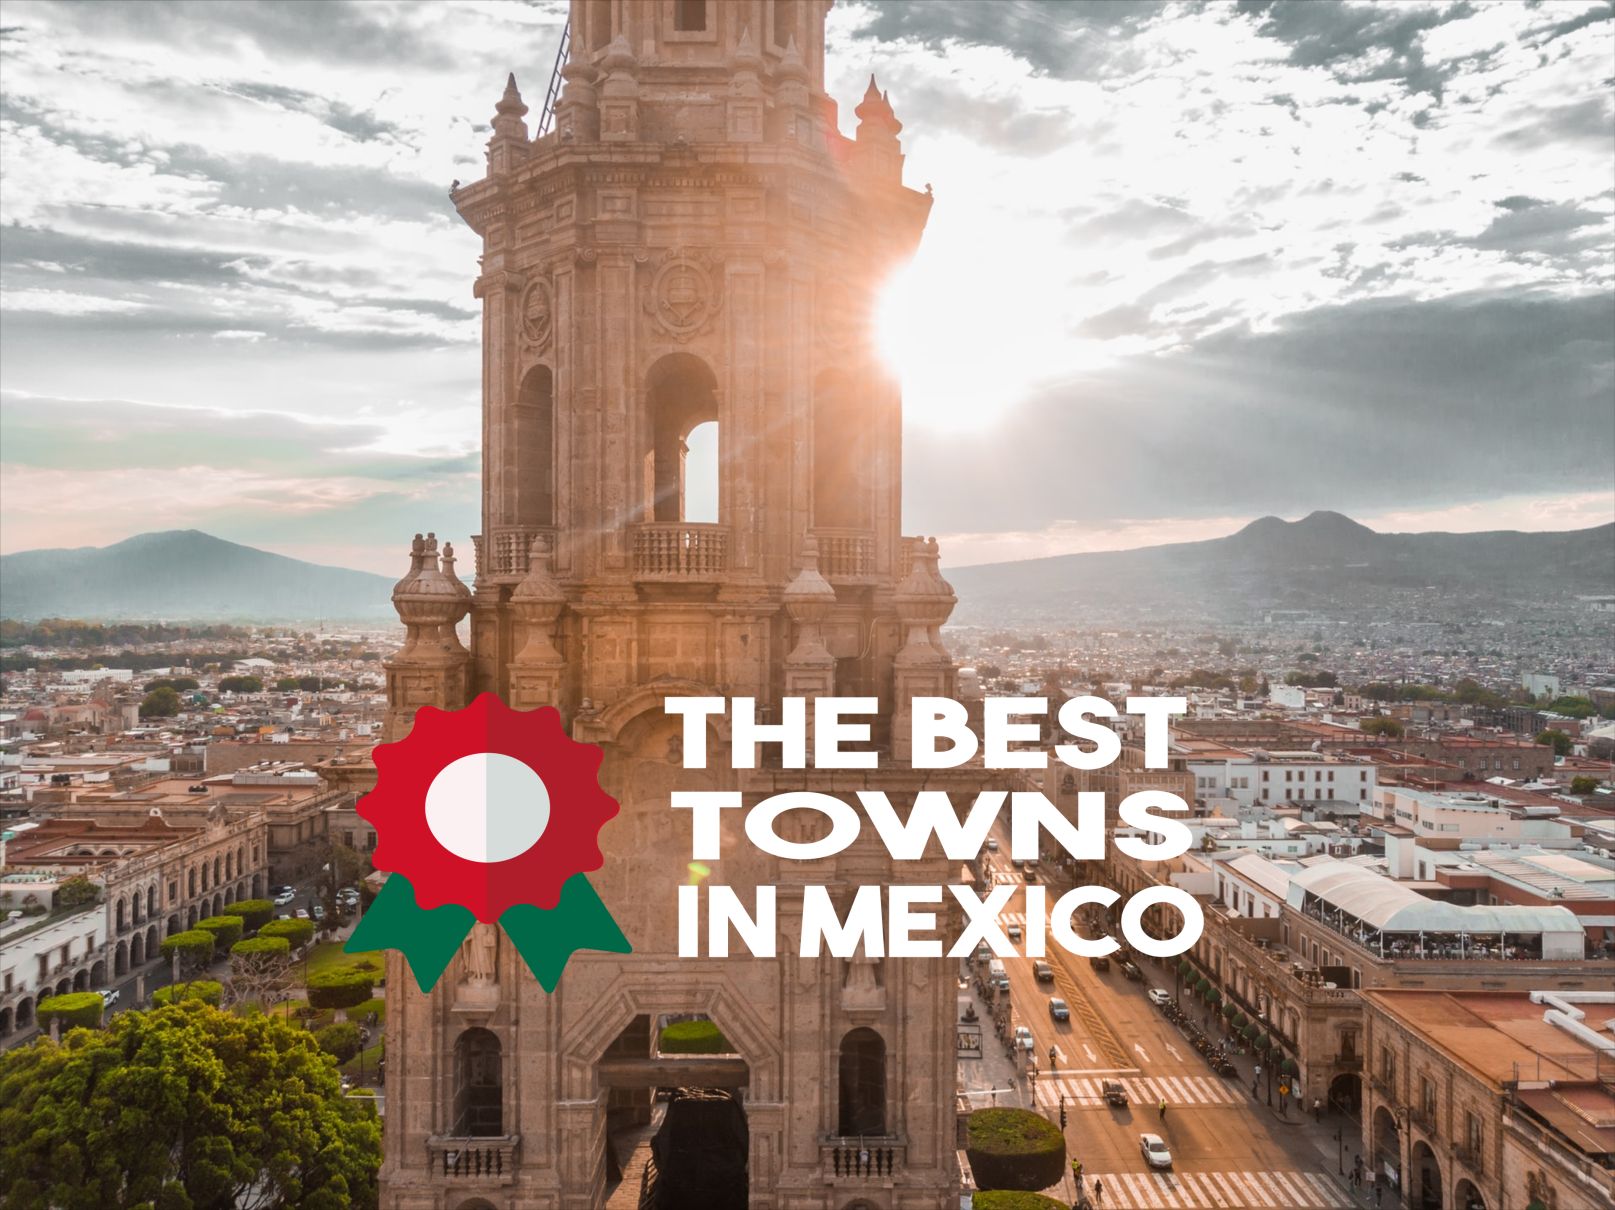 The best towns in Mexico